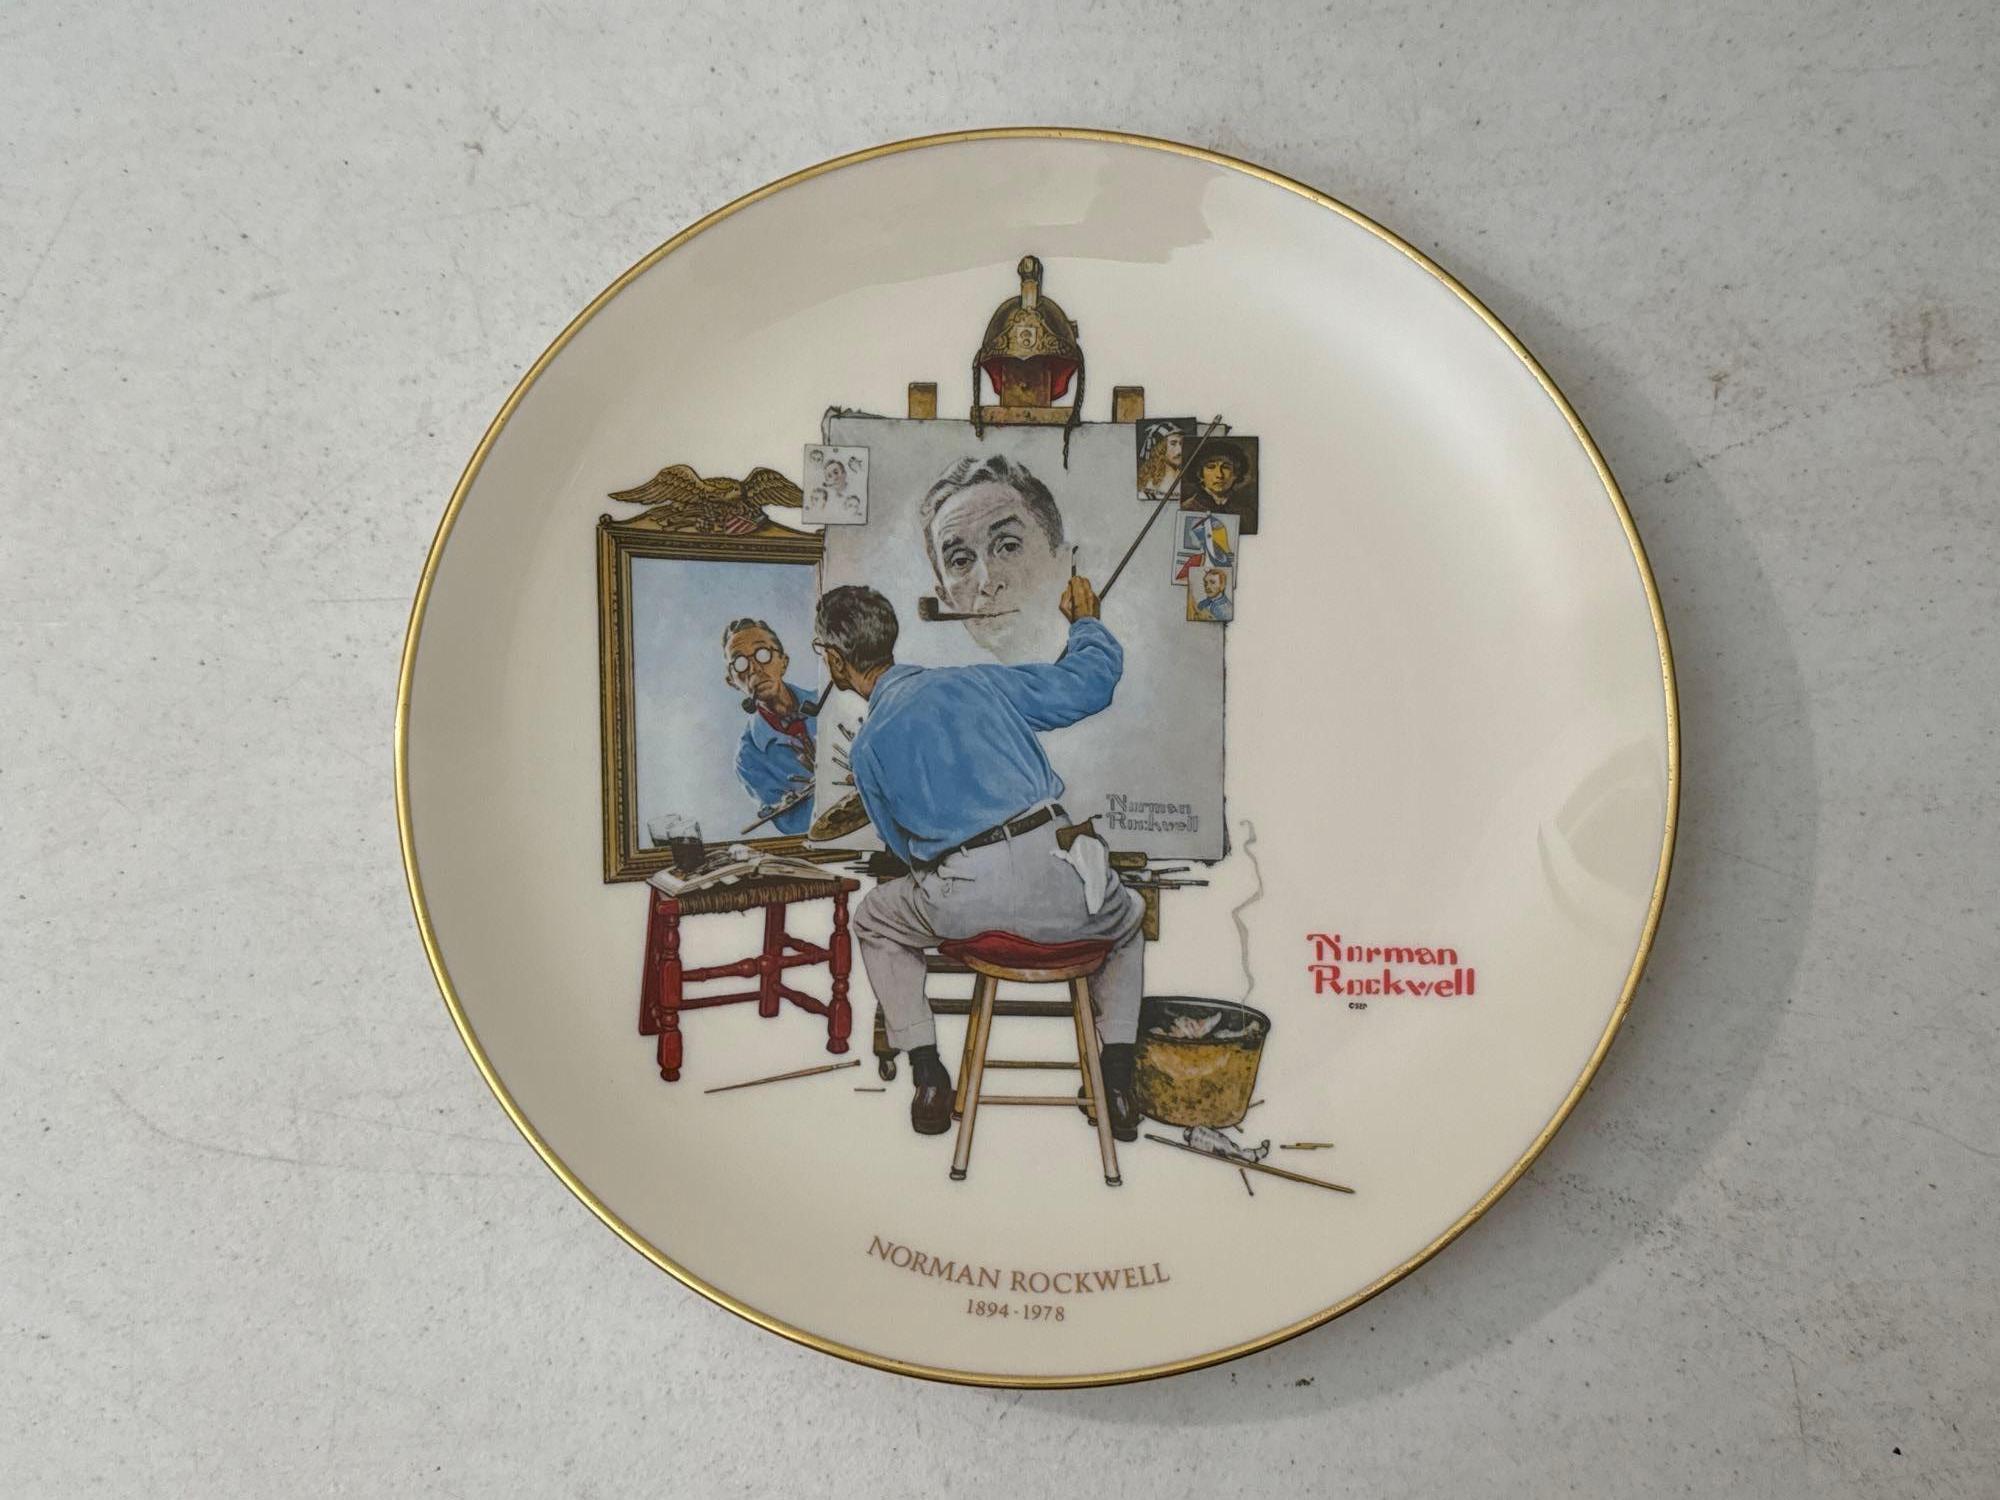 Norman Rockwell Spirit of Scouting Sterling Silver Medals & Collectible Plates